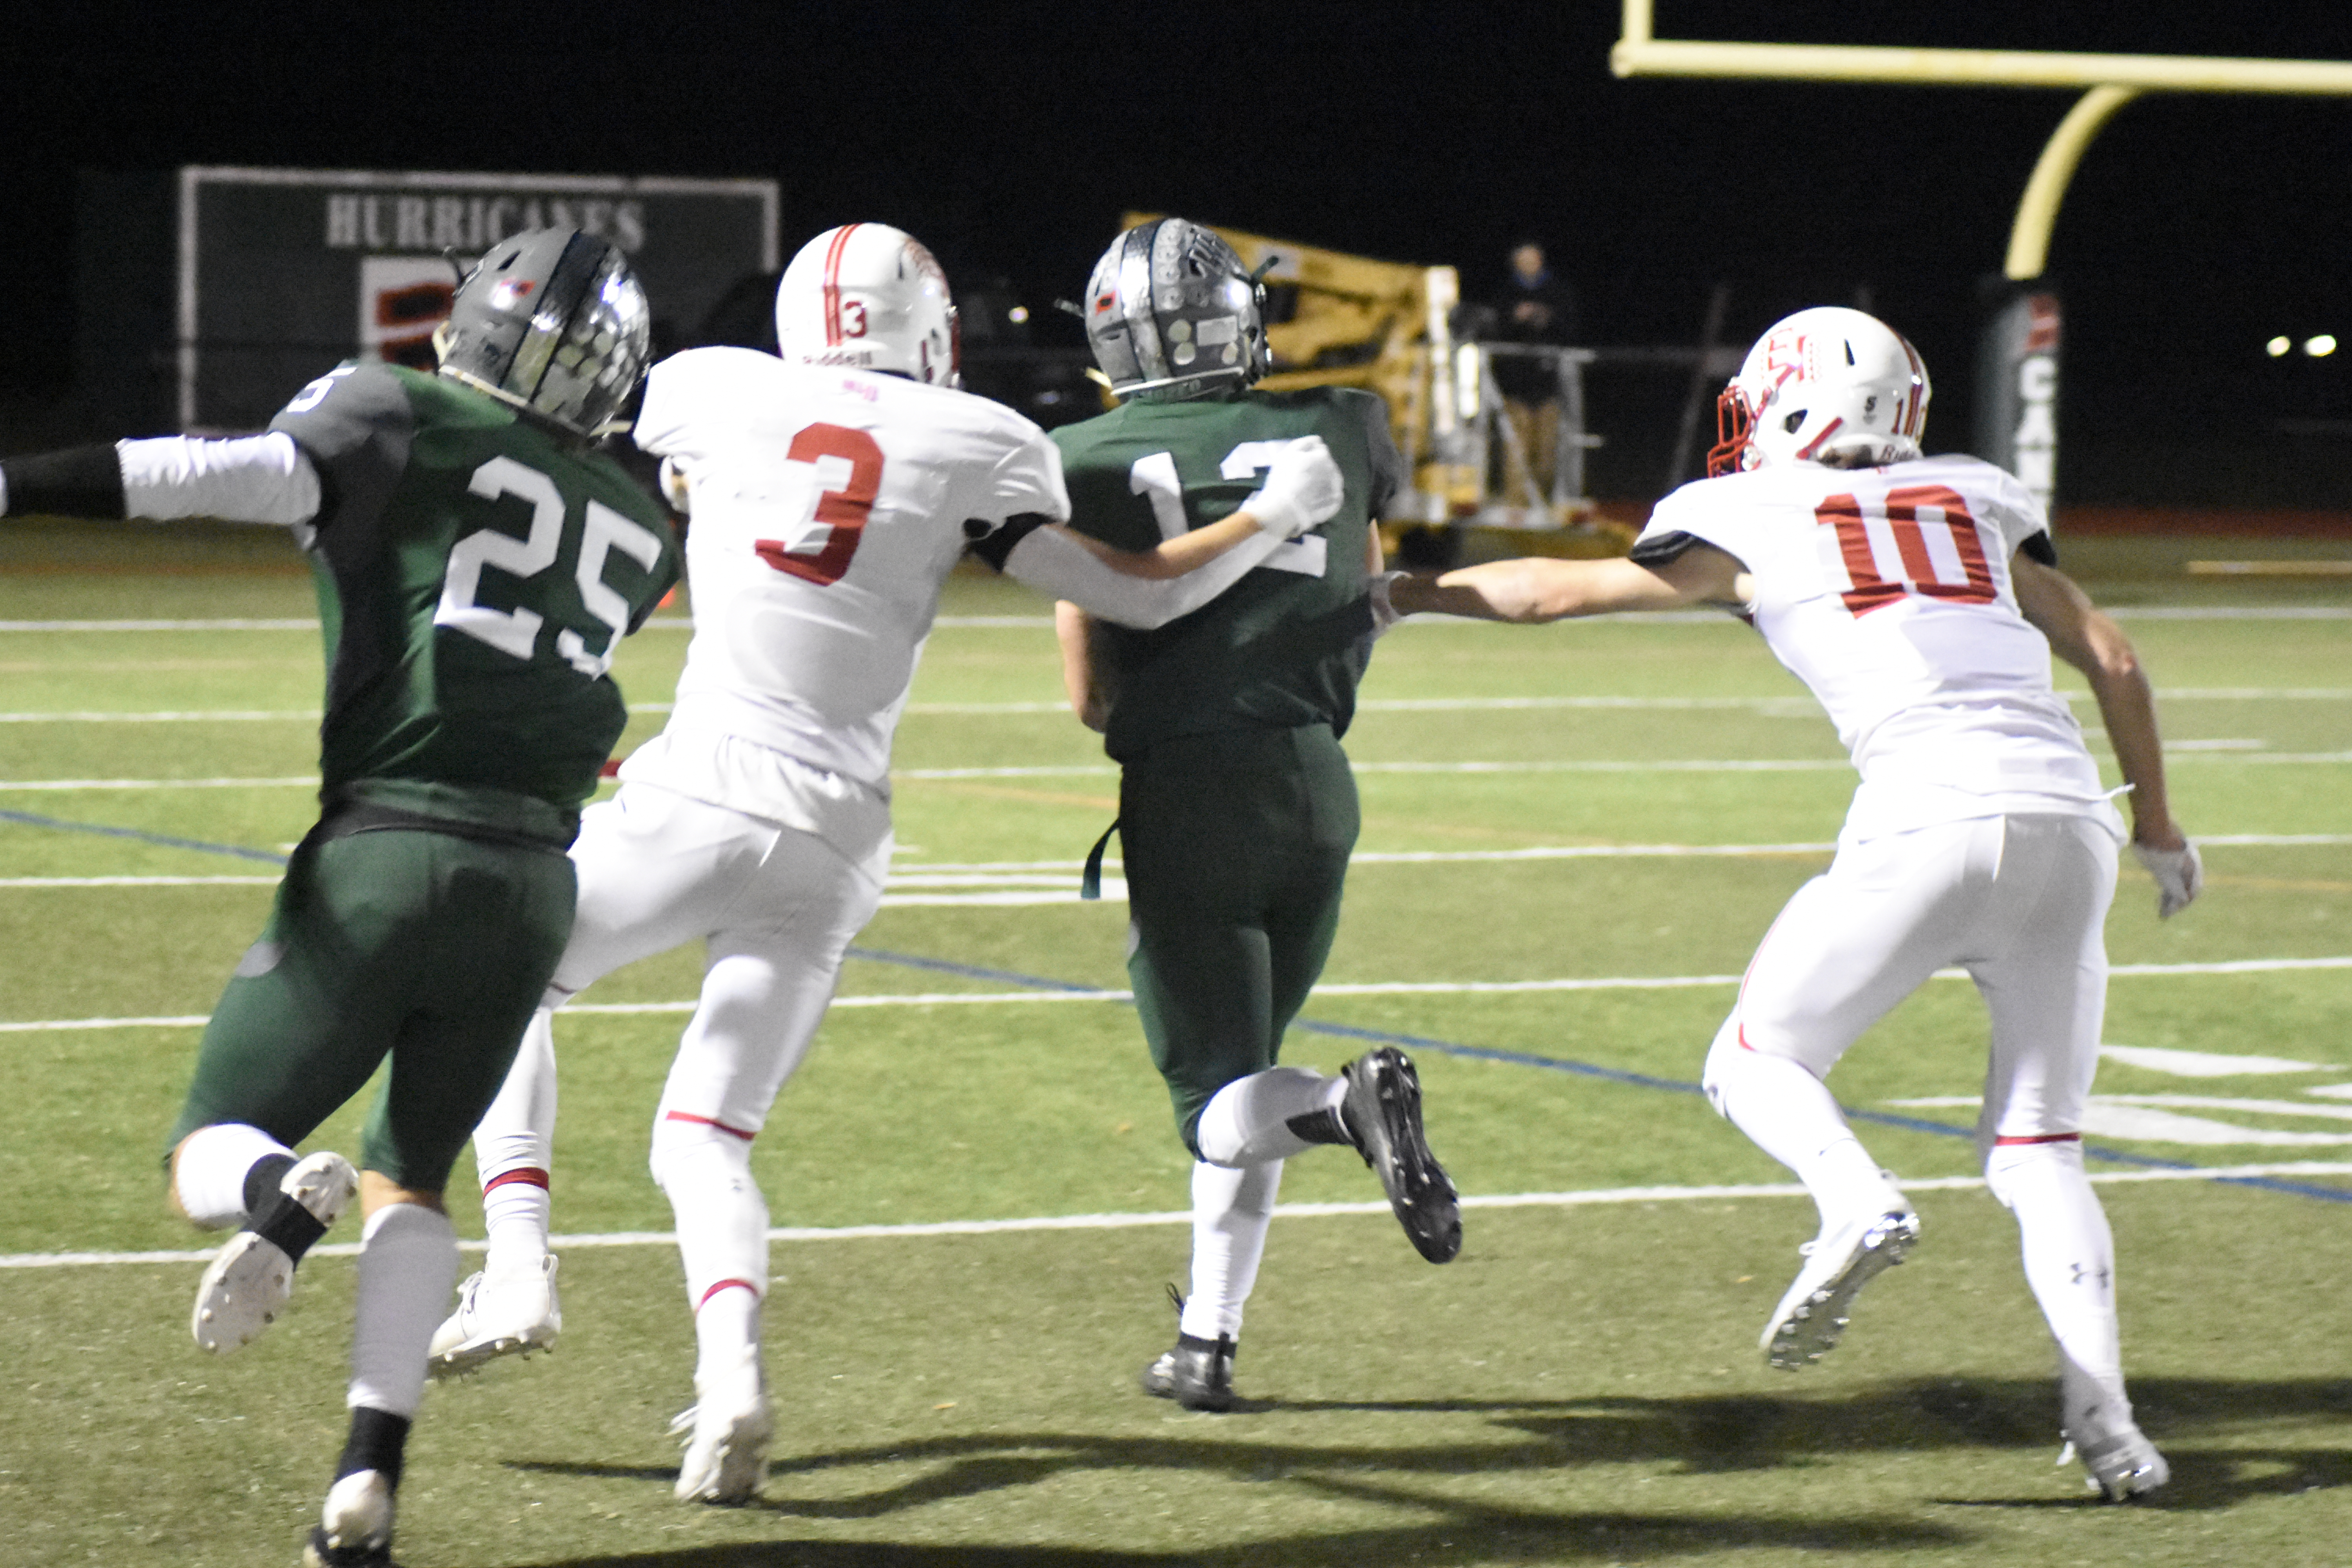 Westhampton Beach senior Jesse AlfanoStJohn was able to get behind the East Islip defense to catch this deep pass from quarterback Christian Capuano, which set up the Hurricanes first touchdown of the game.